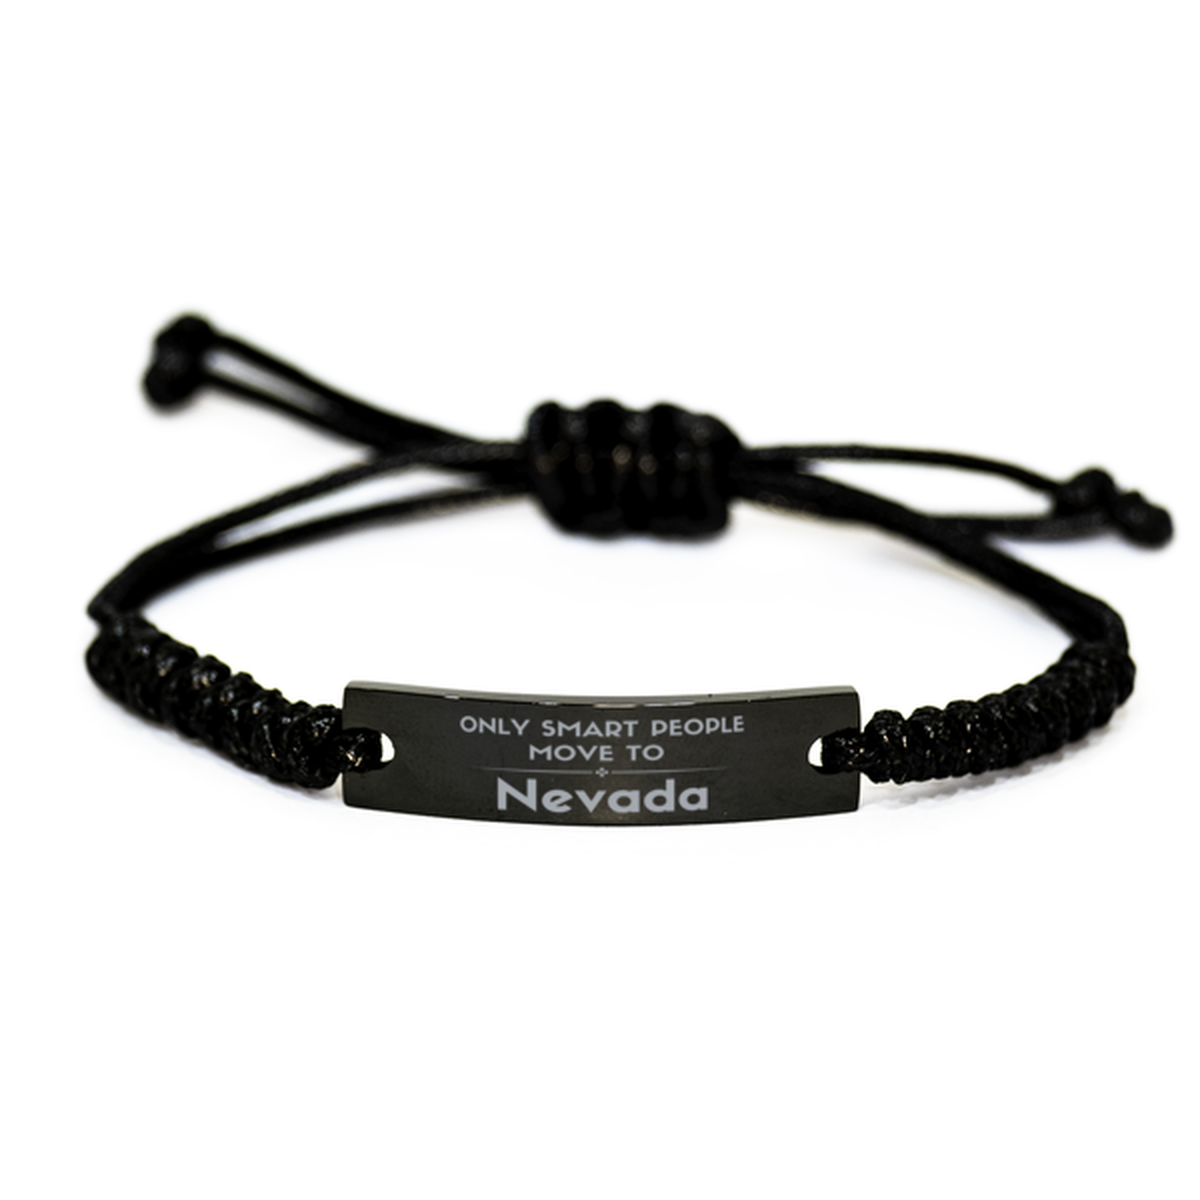 Only smart people move to Nevada Black Rope Bracelet, Gag Gifts For Nevada, Move to Nevada Gifts for Friends Coworker Funny Saying Quote